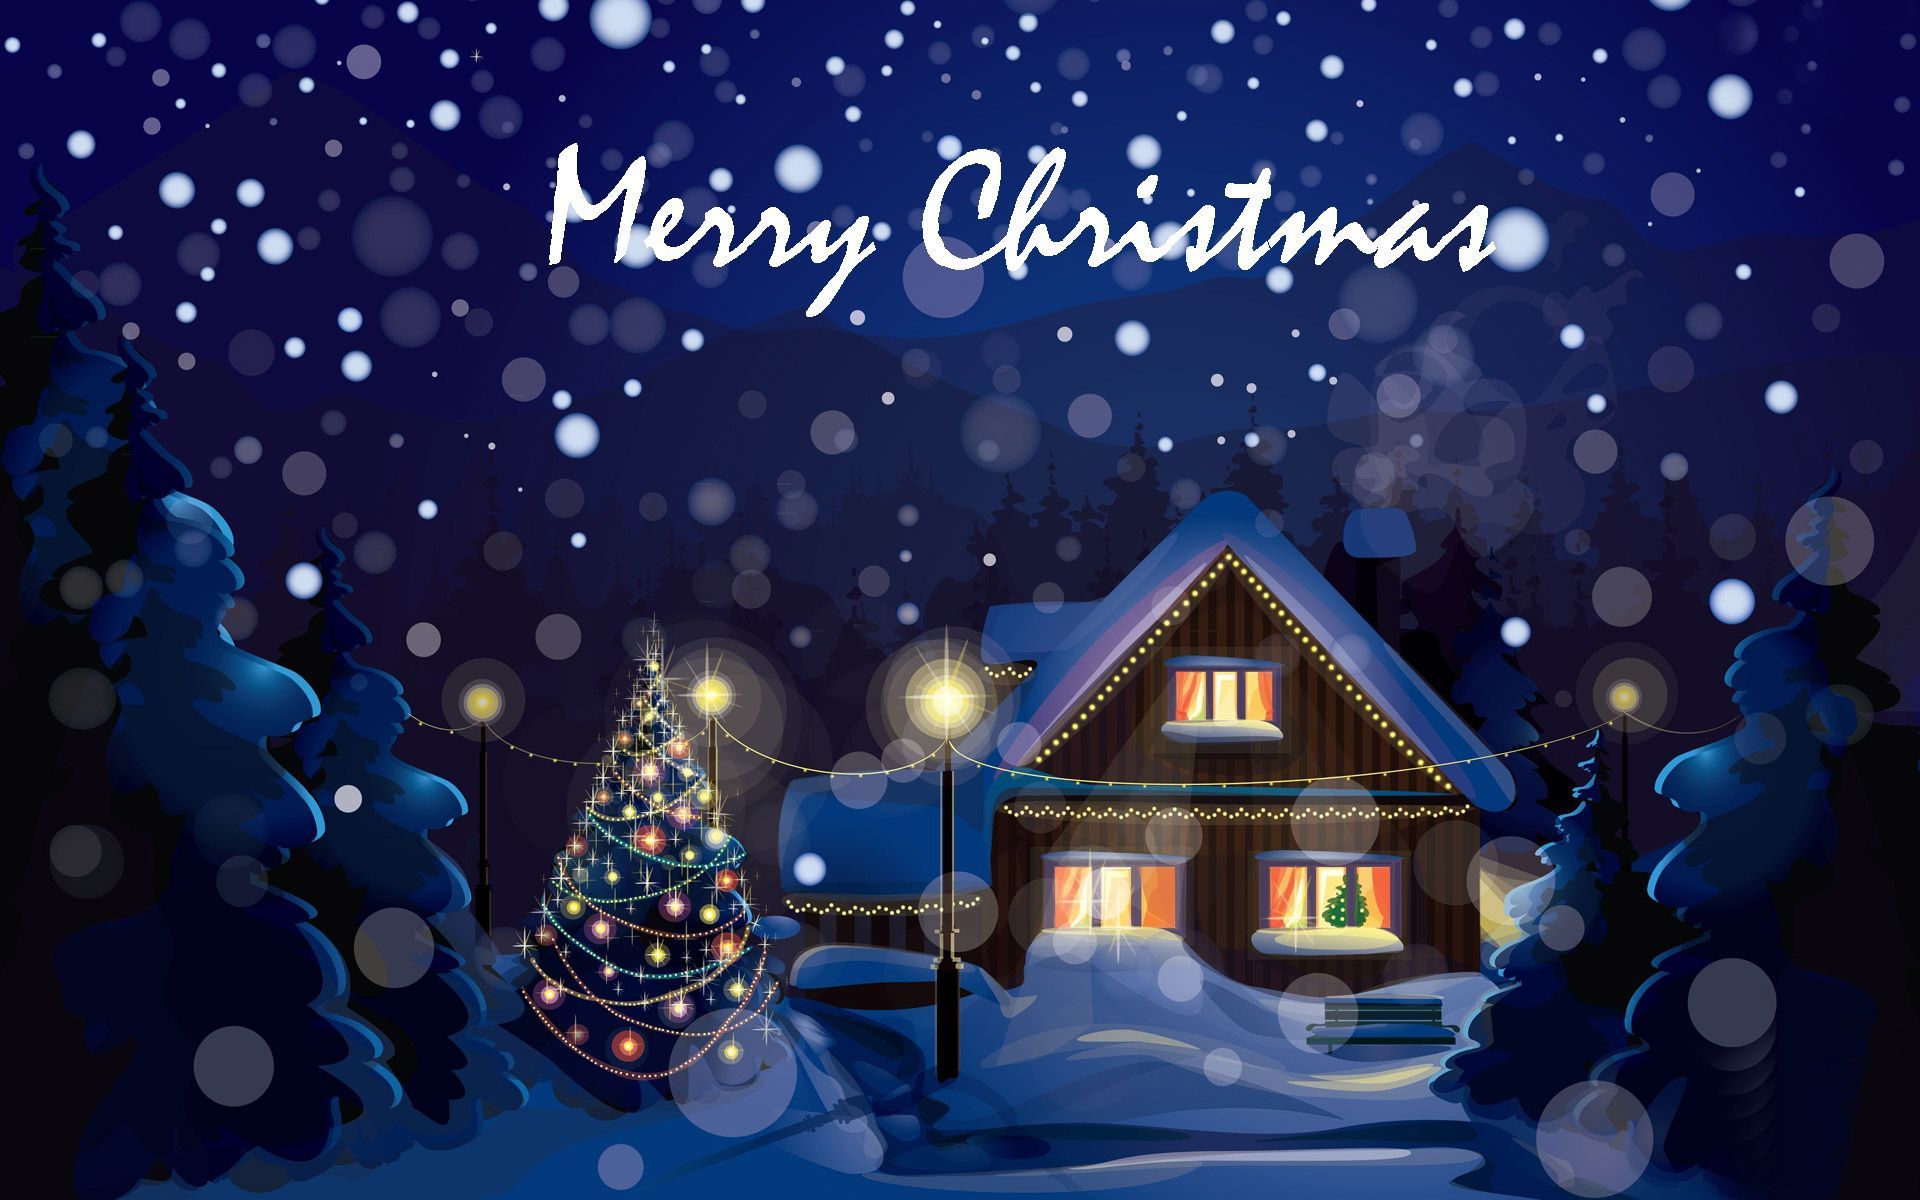 Merry Christmas Wallpapers HD 2015 free download | Wallpapers ...